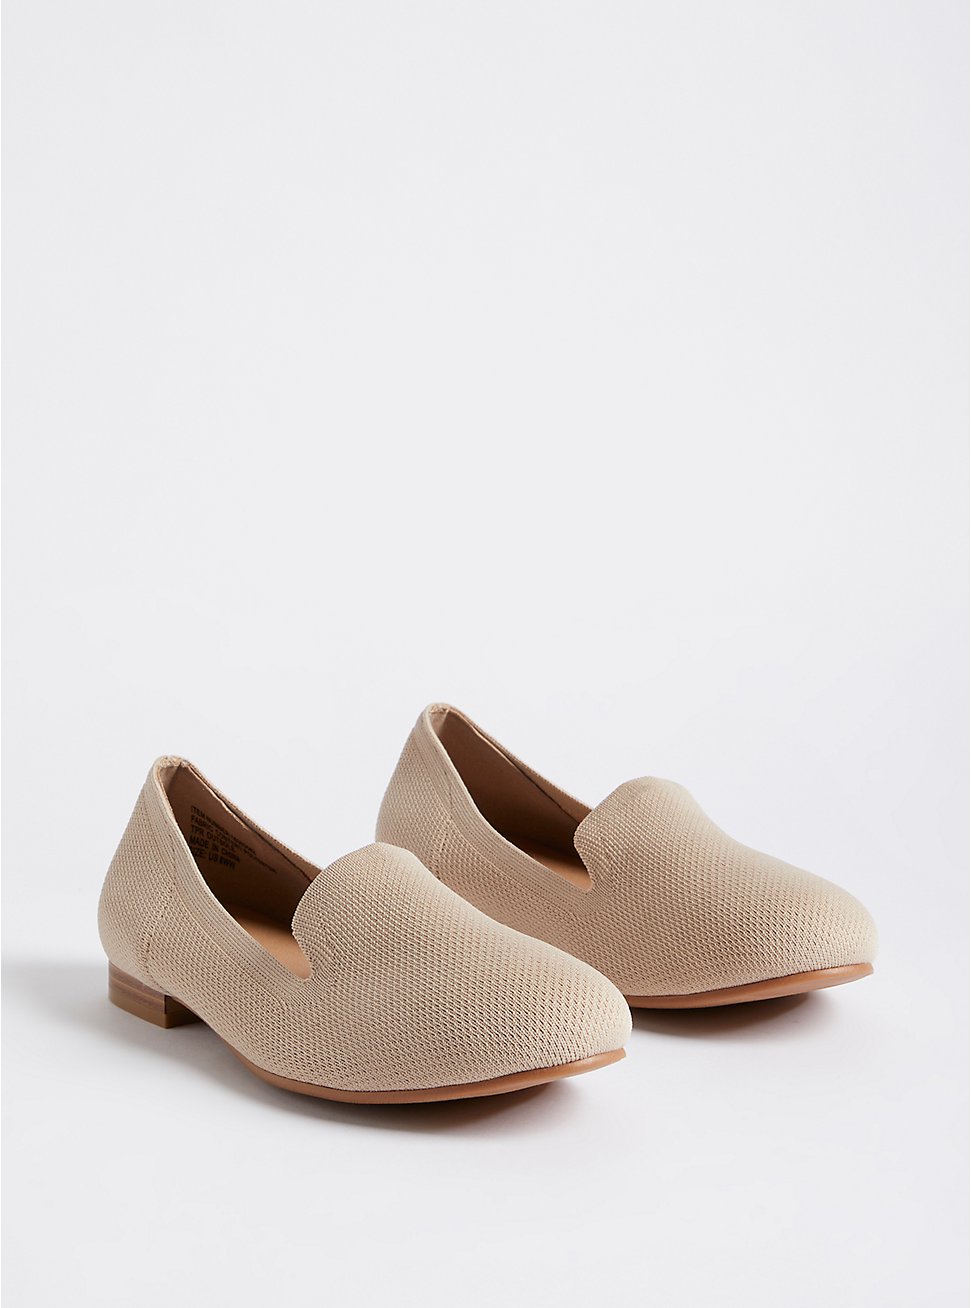 Plus Size Knit Loafer - Taupe (WW), TAUPE, hi-res